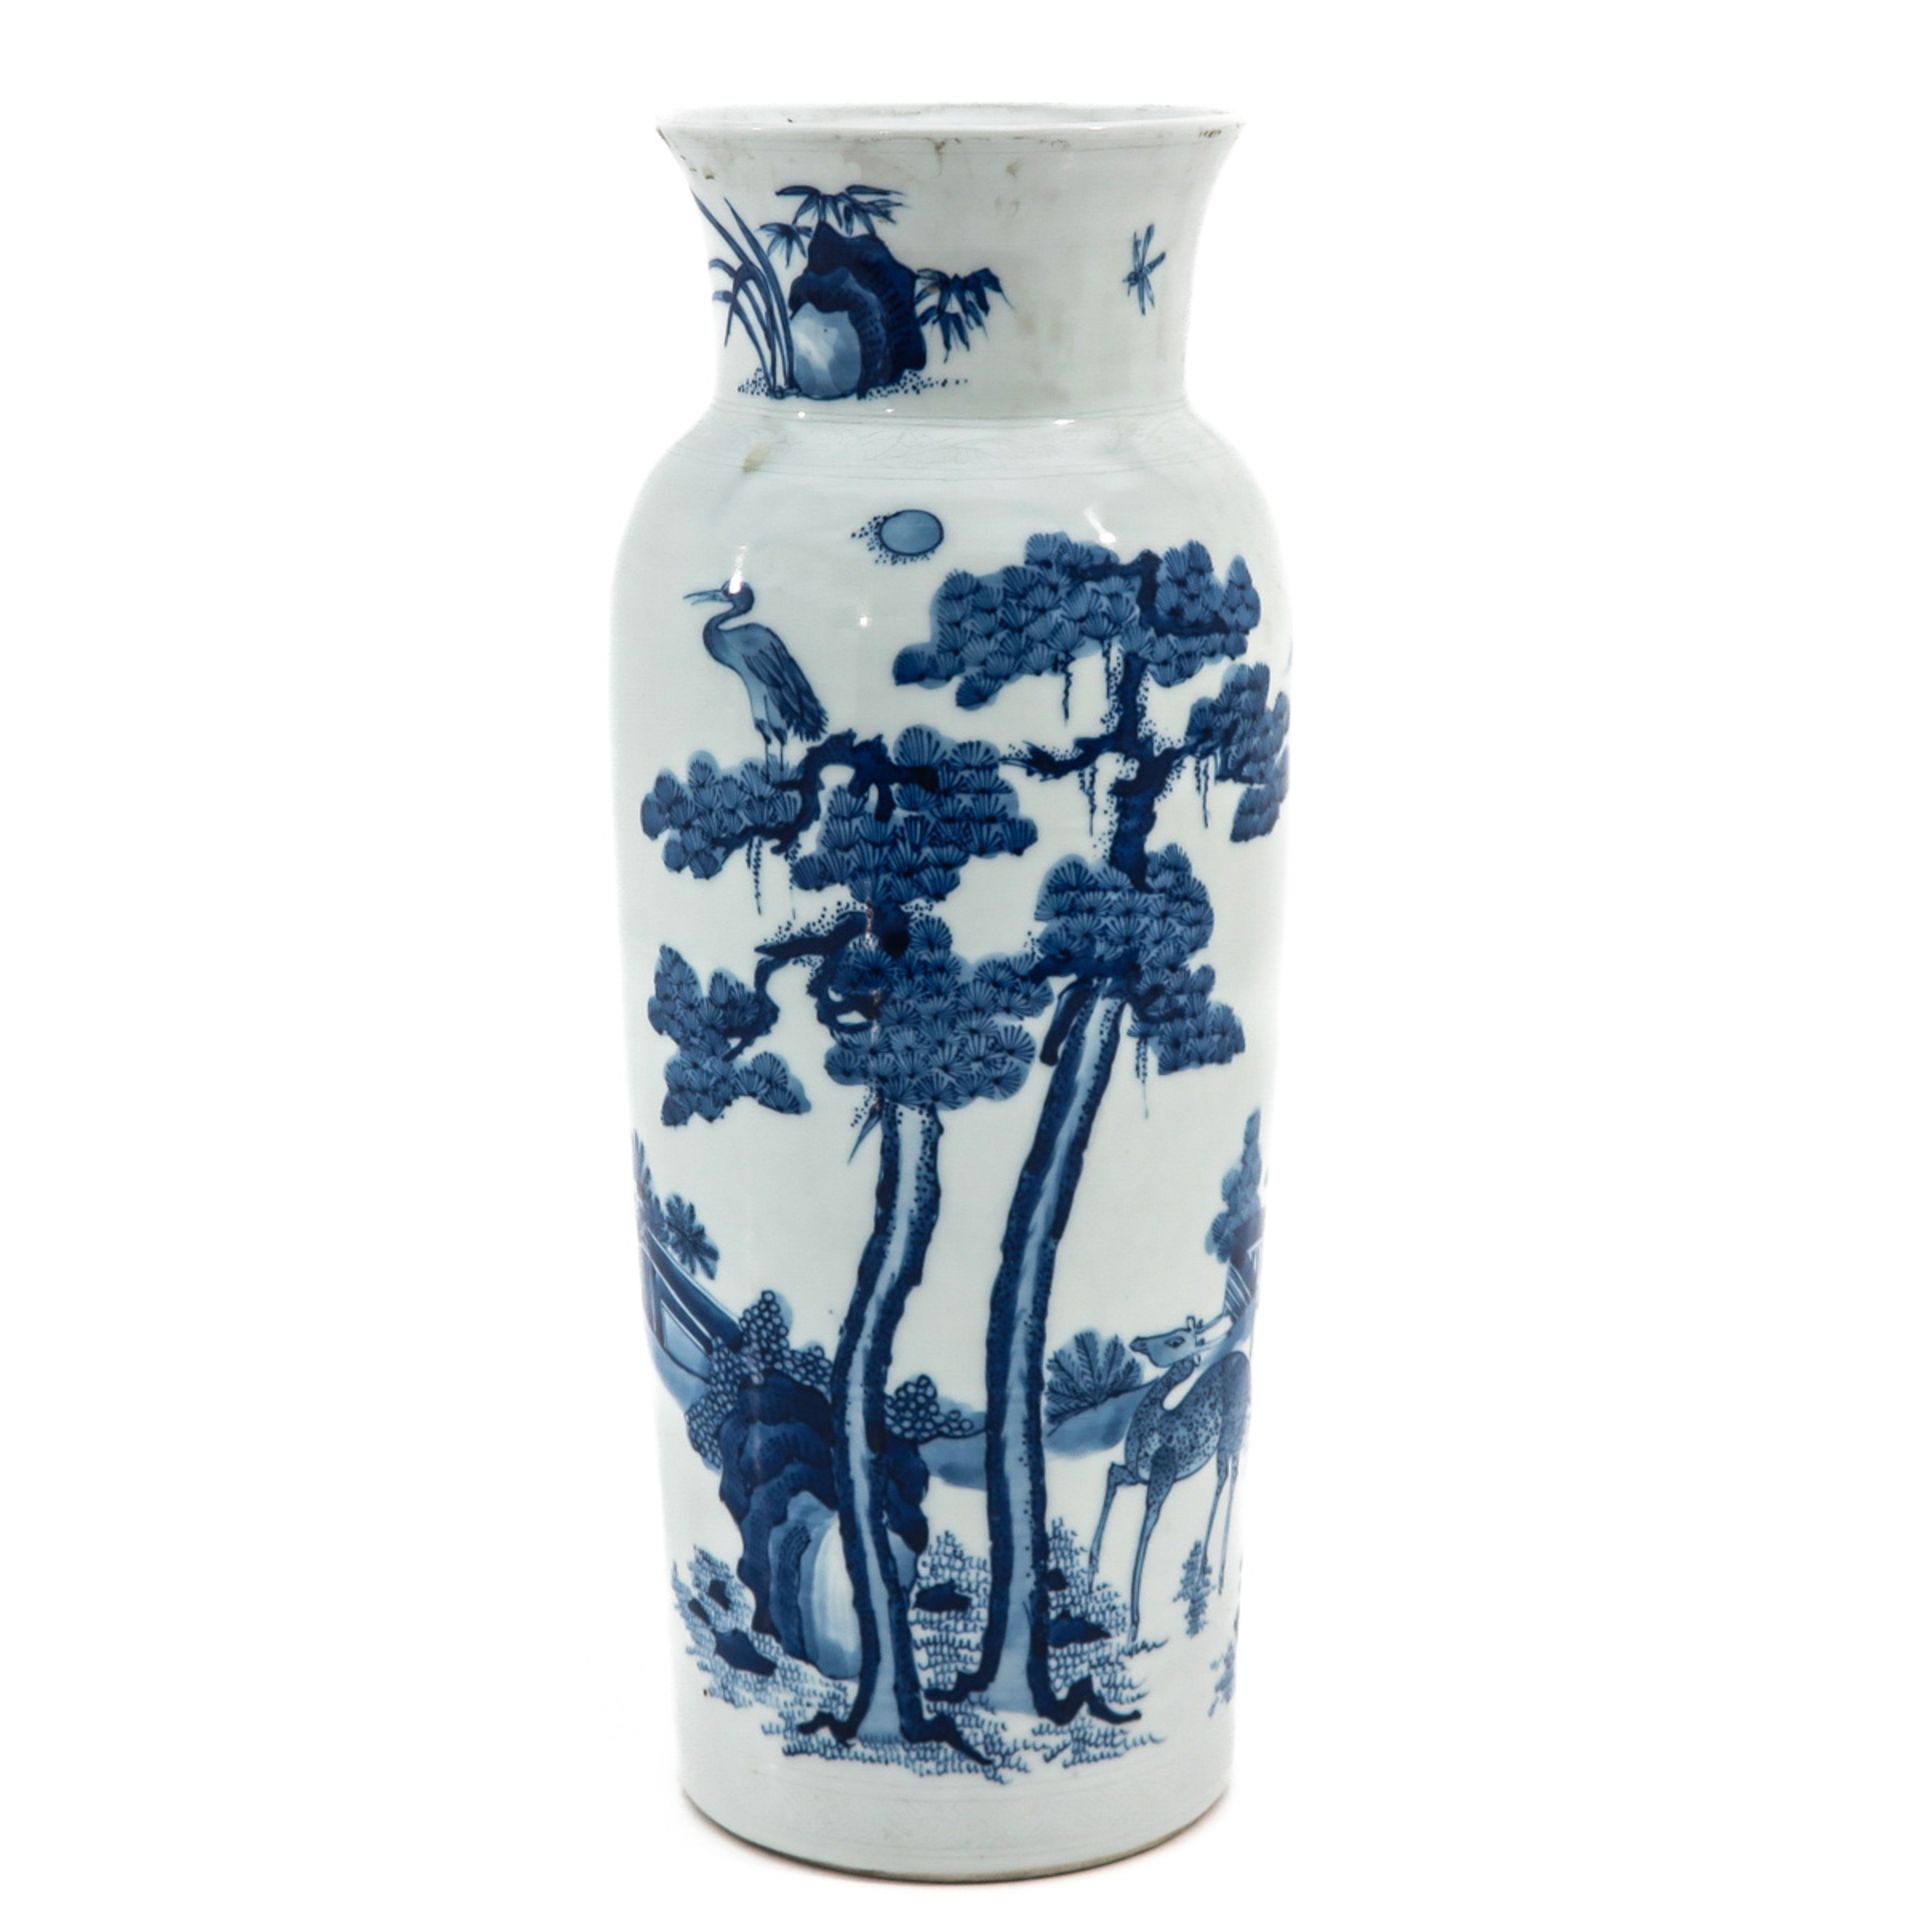 A Blue and White Rouleau Vase